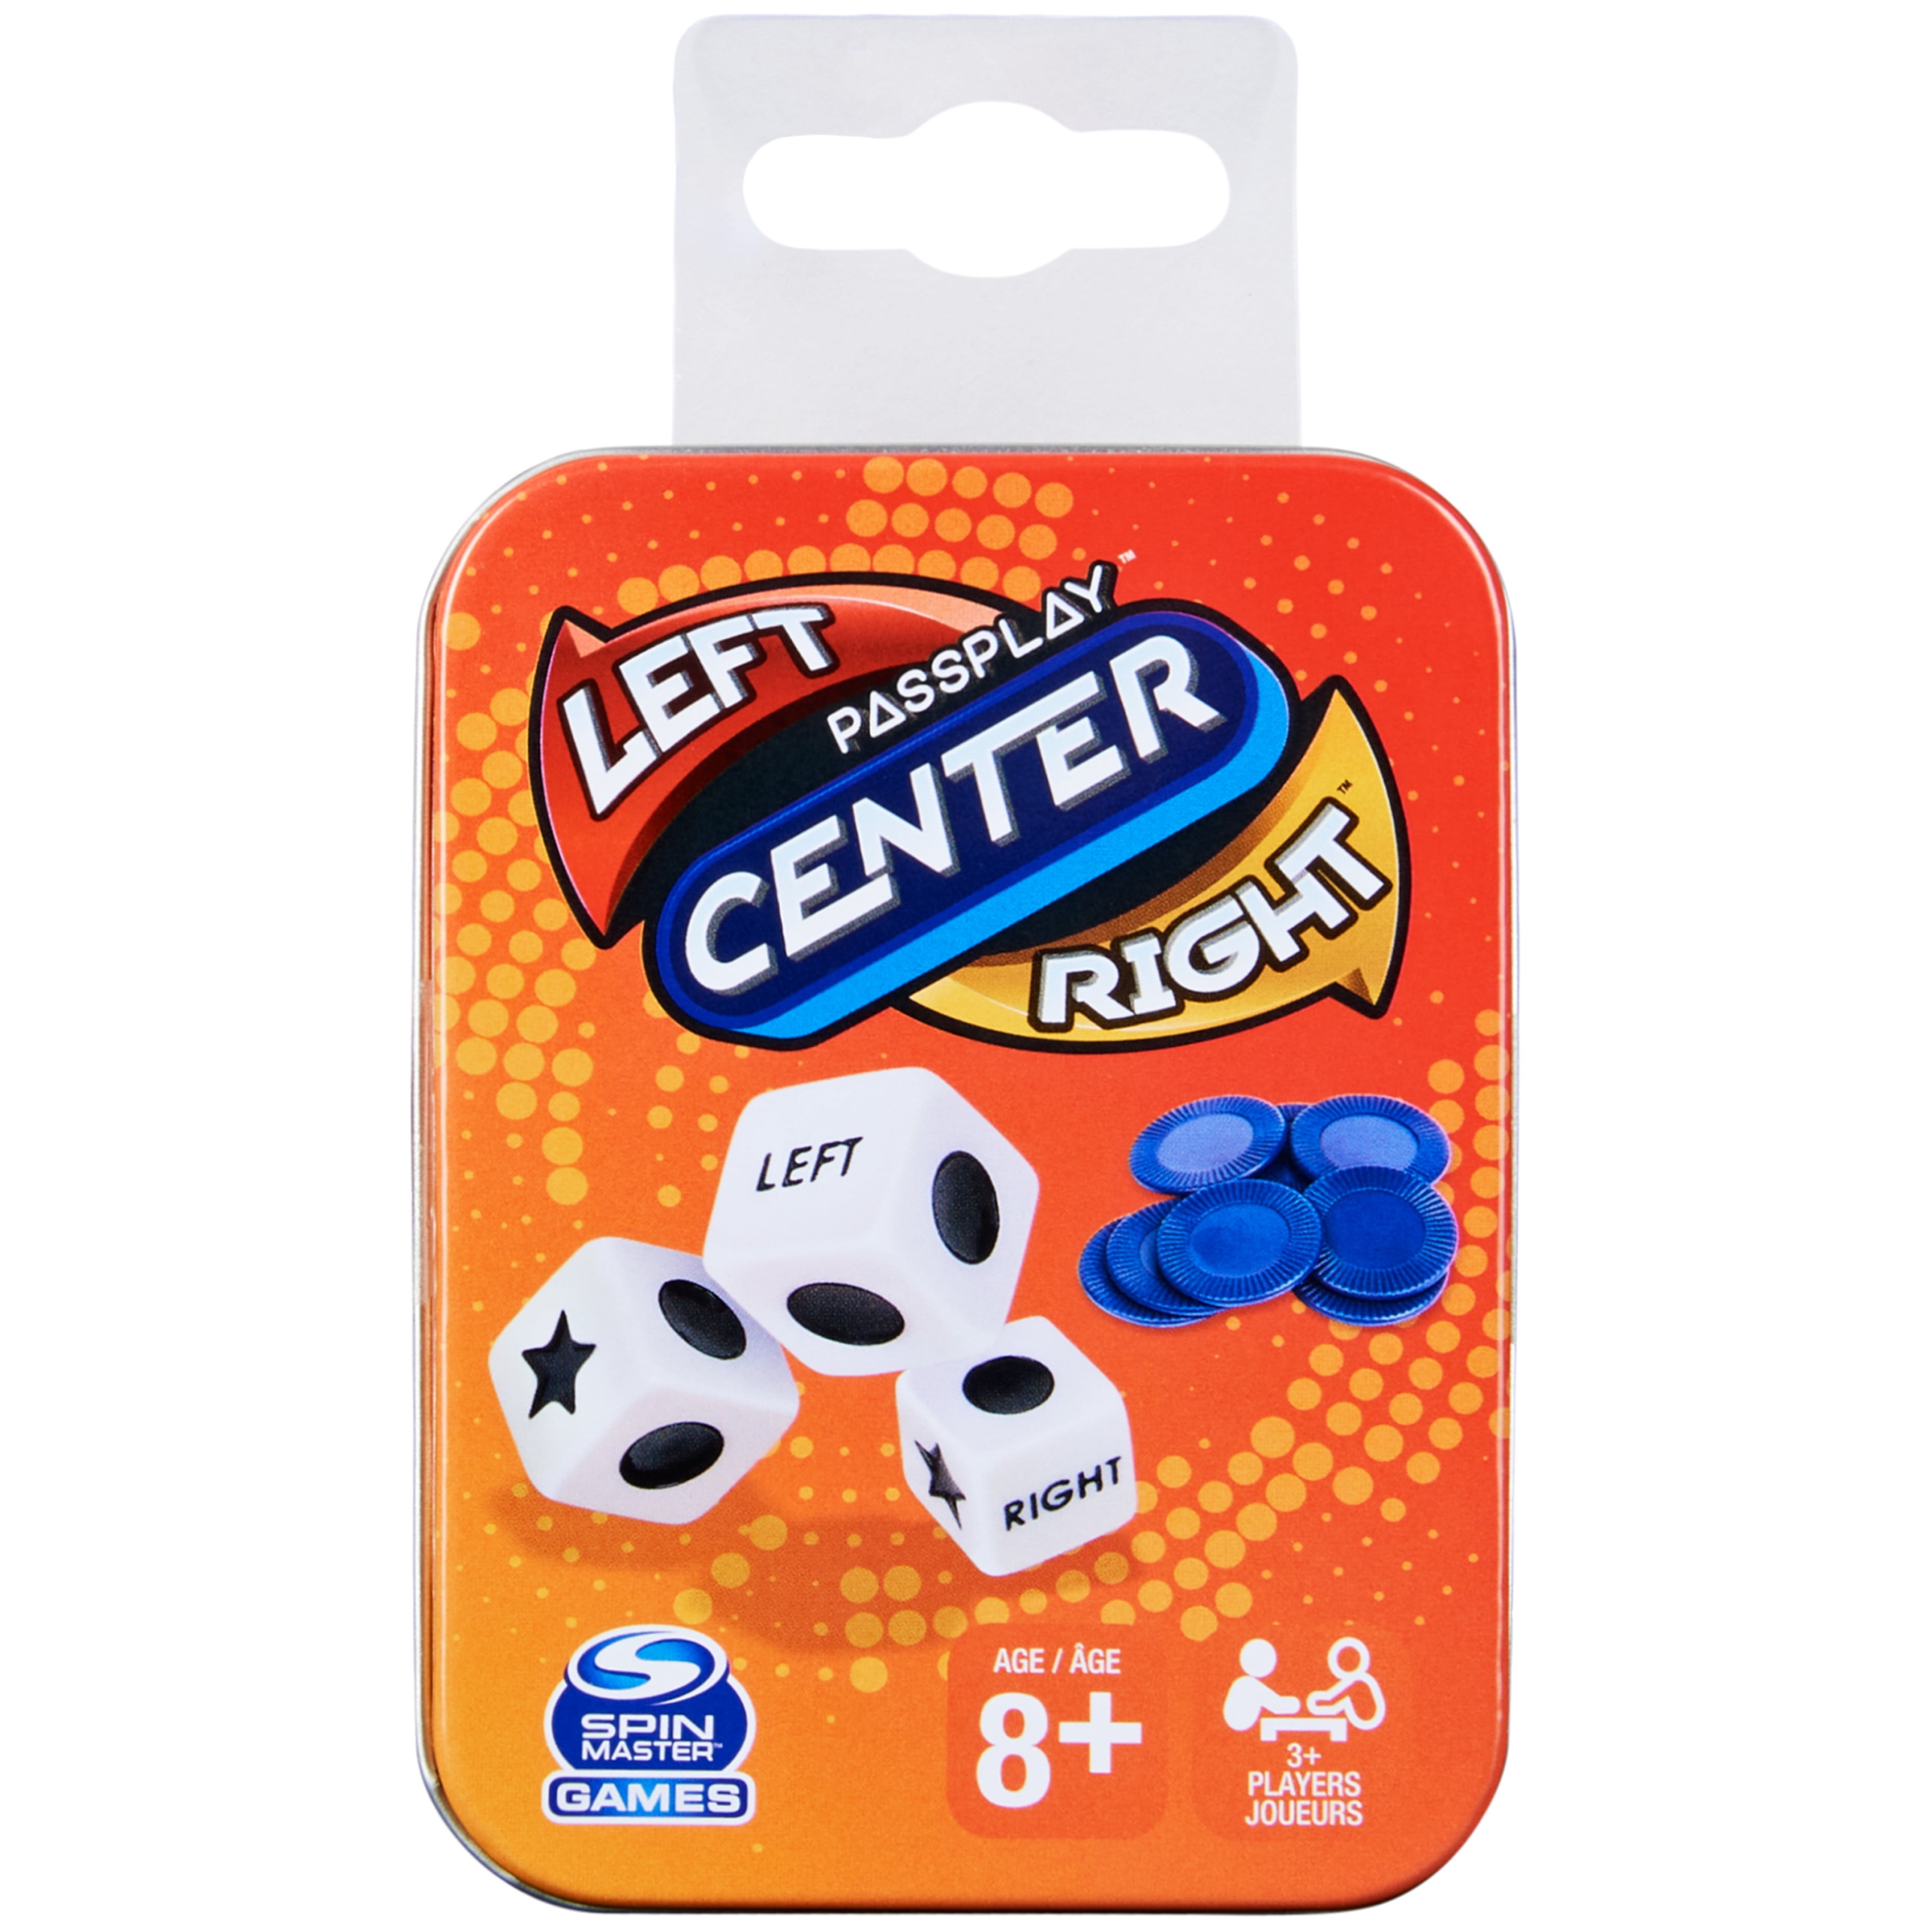 Dice Game Left Center Right Fast-Paced Travel Family w/ Chips & dice 